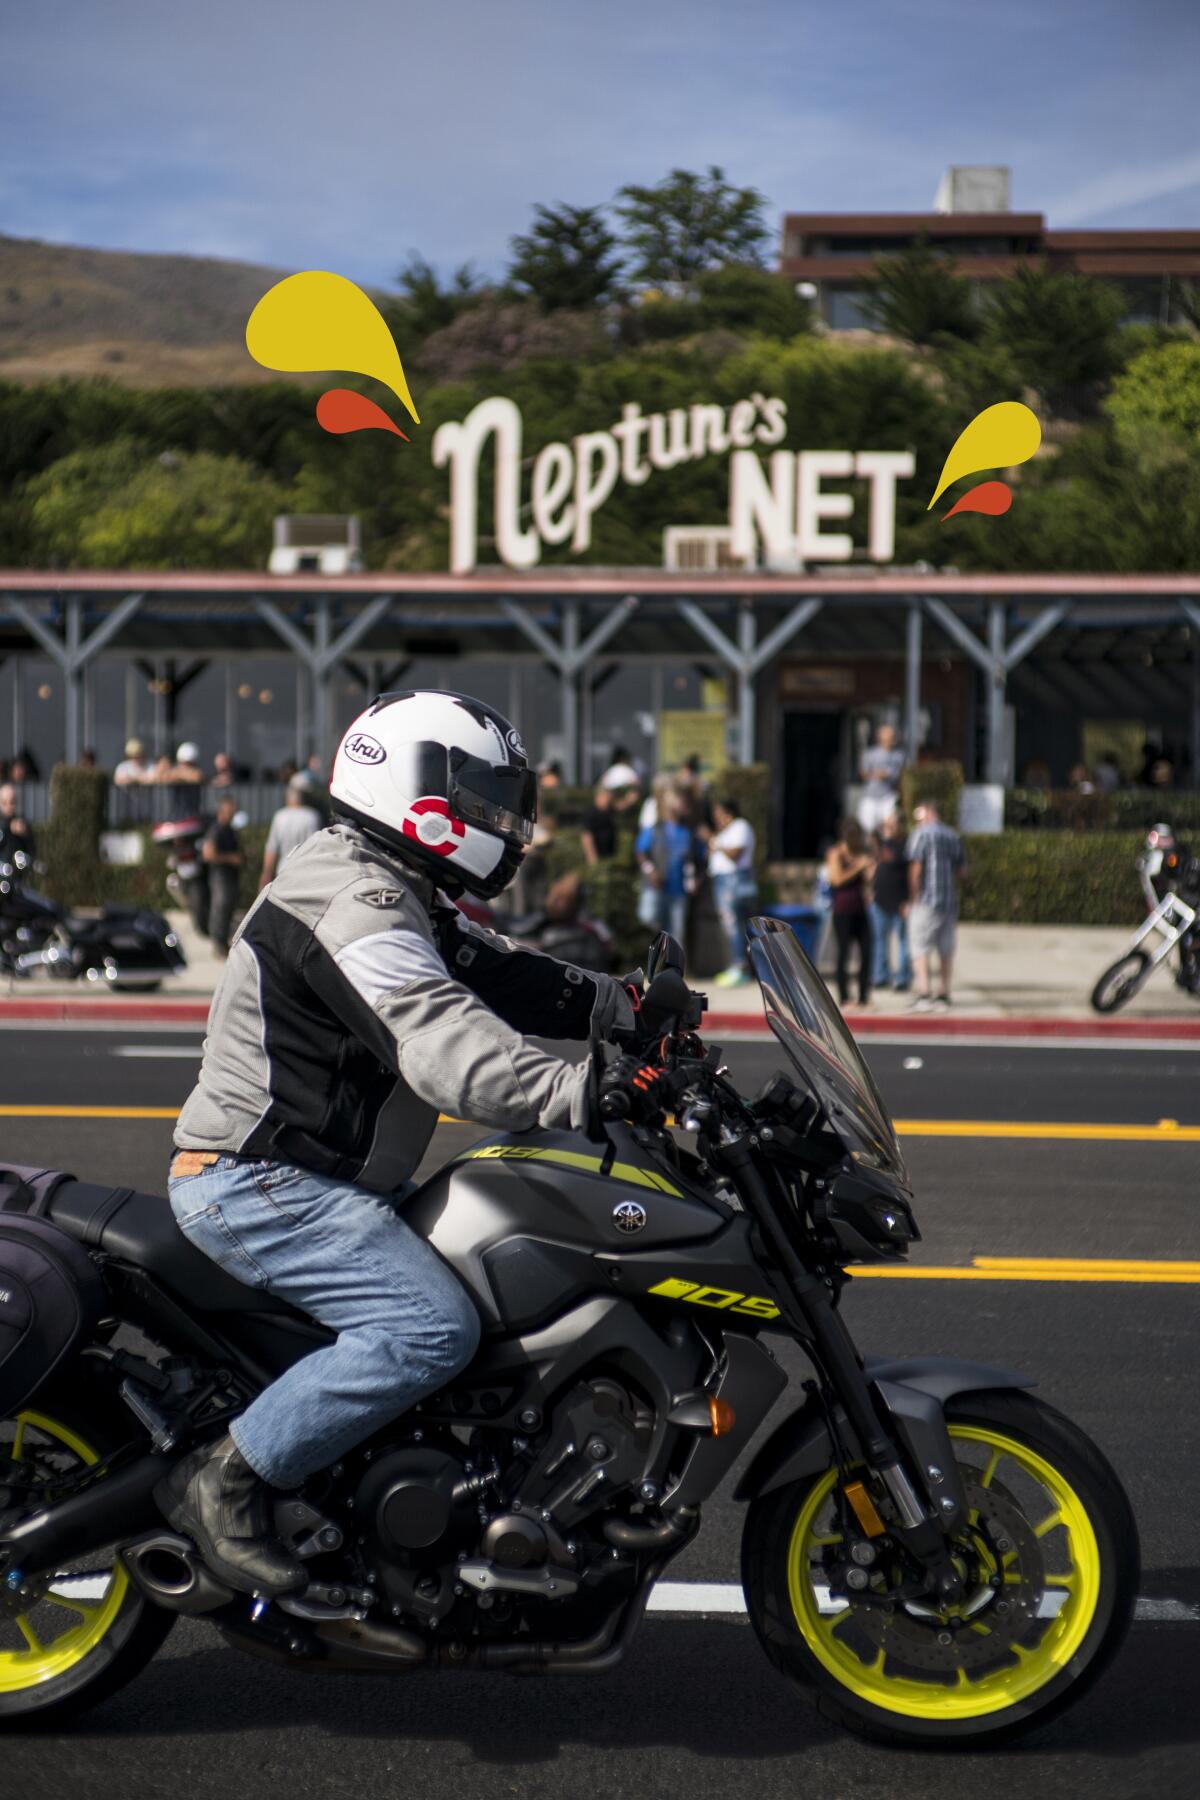 A motorcyclist rides along the Pacific Coast Highway in front of Neptune's Net in Malibu, Calif.